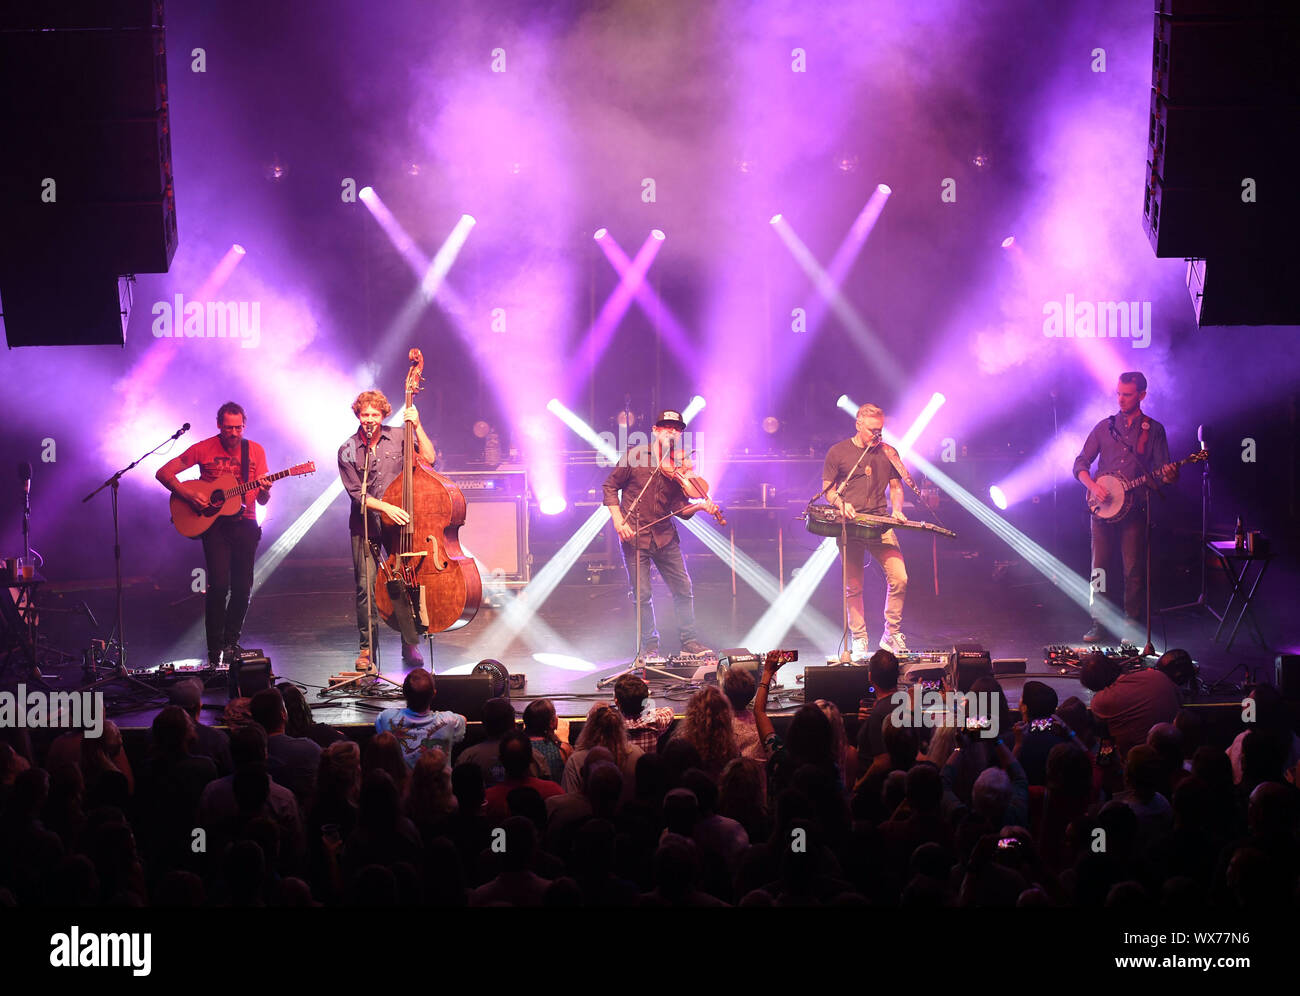 September 13, 2019, Norfolk, Virginia, USA: The  Infamous Stringdusters  bring the bluegrass  to the Norva in Norfolk, Virginia 13  September 2019.The Infamous Stringdusters are ANDY FALCO (guitar), CHRIS PANDOLFI (banjo), ANDY HALL (dobro), JEREMY GARRETT (fiddle),TRAVIS BOOK (double bass) .Photo  Â© Jeff Moore 2019 (Credit Image: © Jeff Moore/ZUMA Wire) Stock Photo